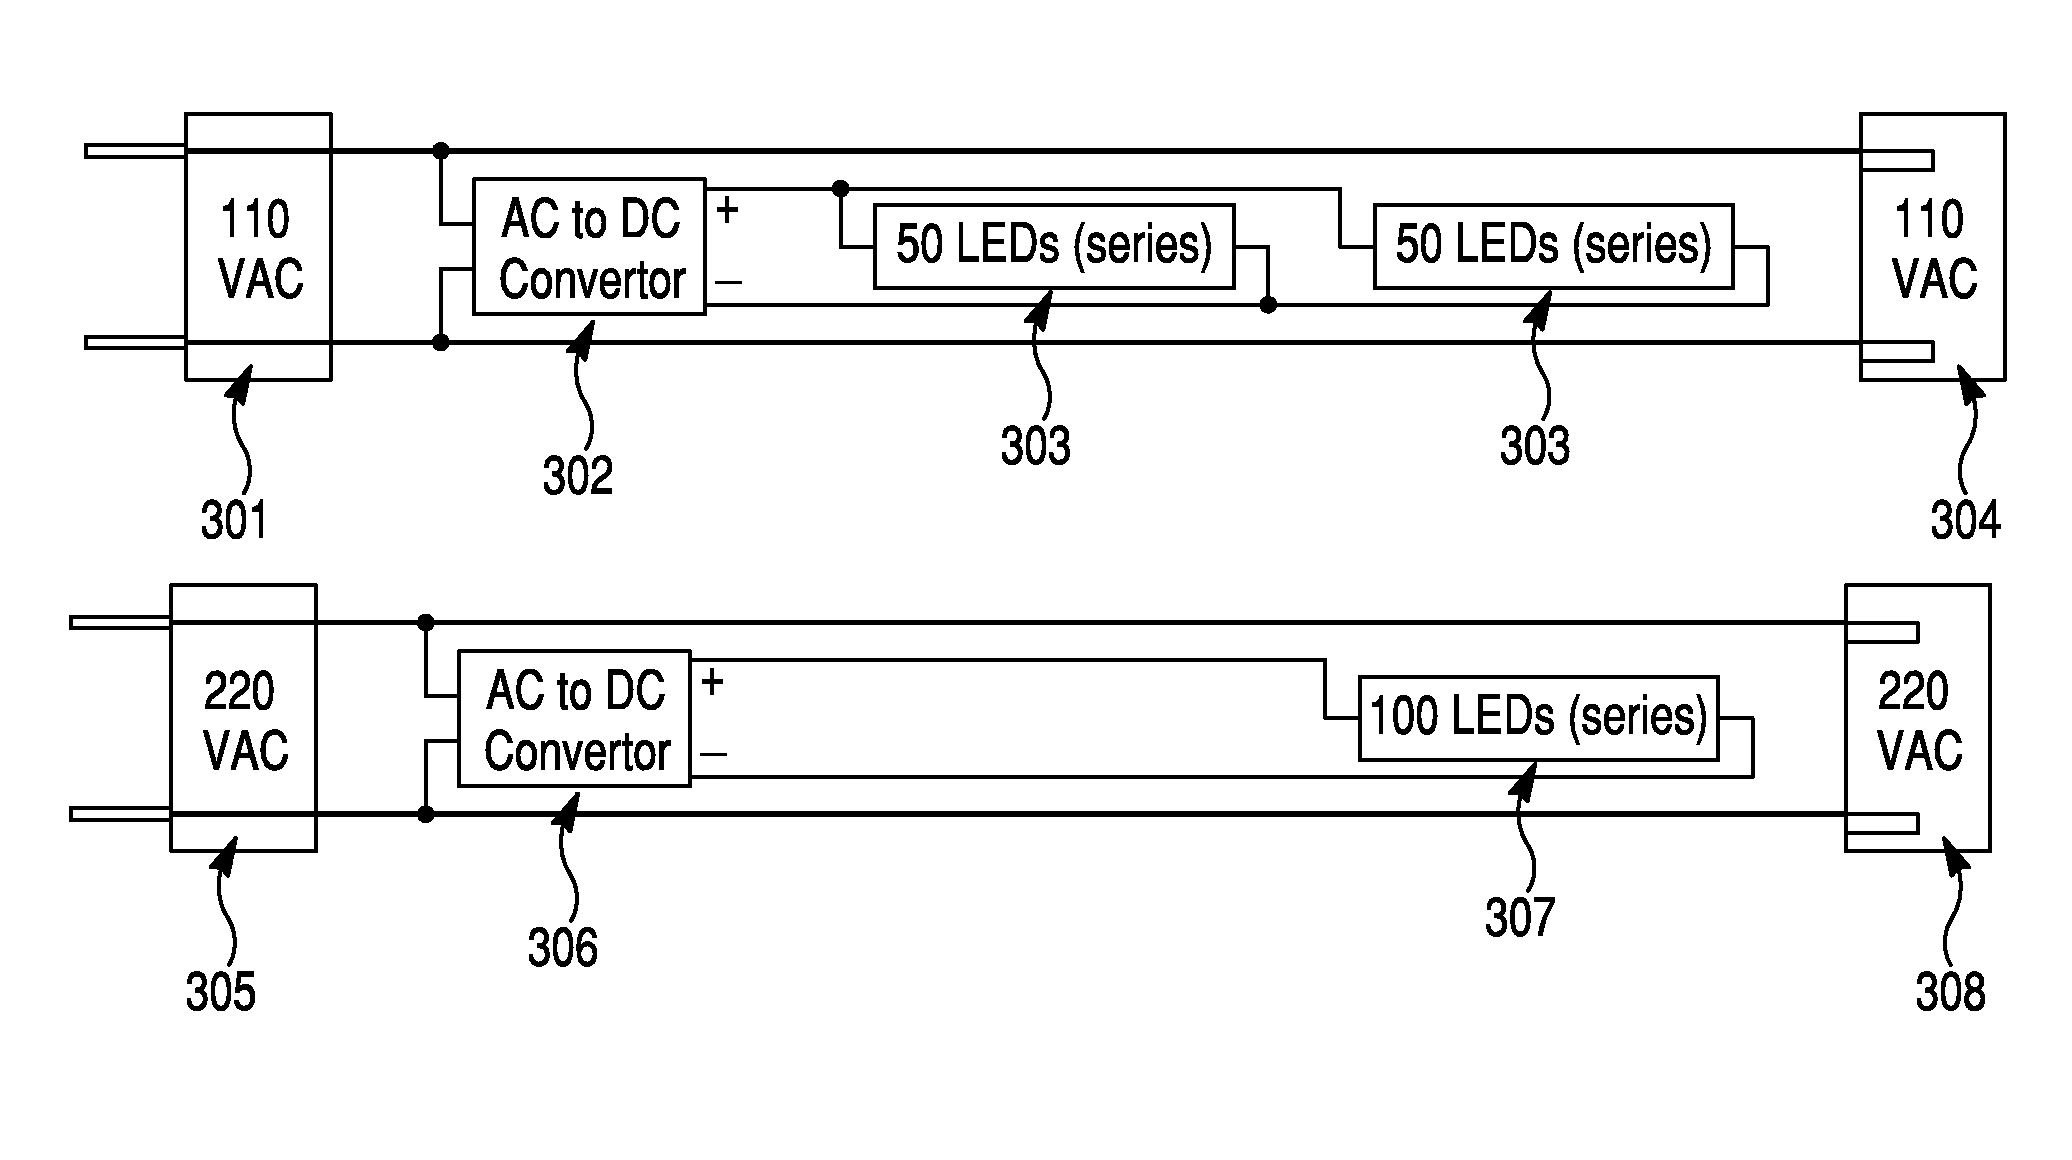 LED lights with matched AC voltage using rectified circuitry